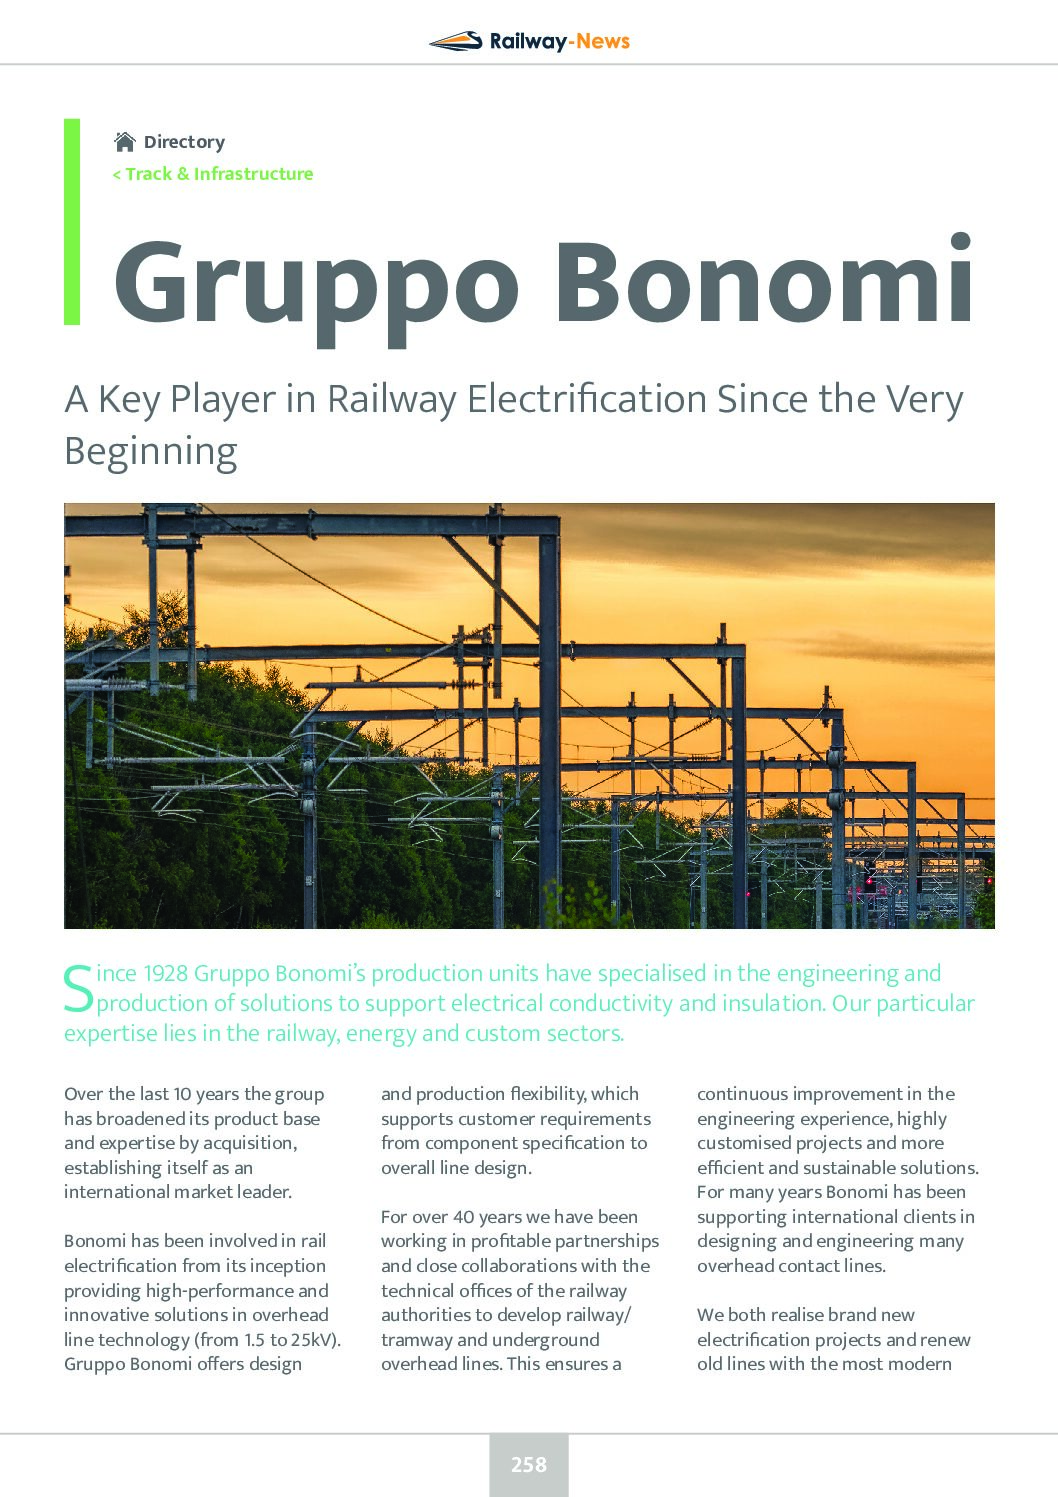 A Key Player in Railway Electrification Since the Very Beginning